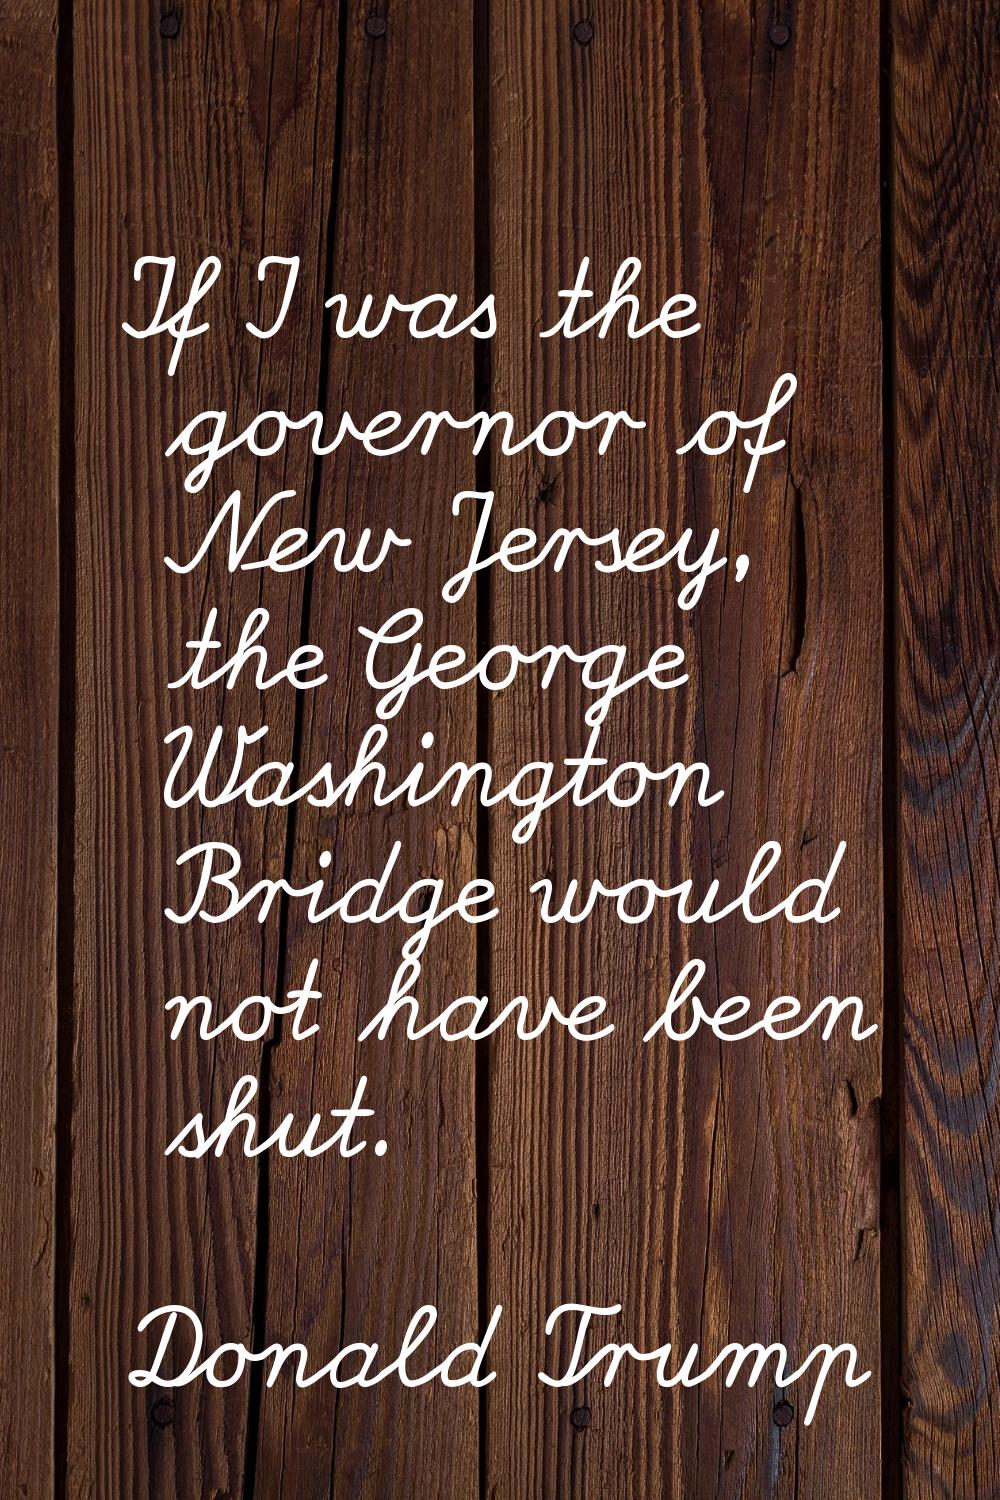 If I was the governor of New Jersey, the George Washington Bridge would not have been shut.